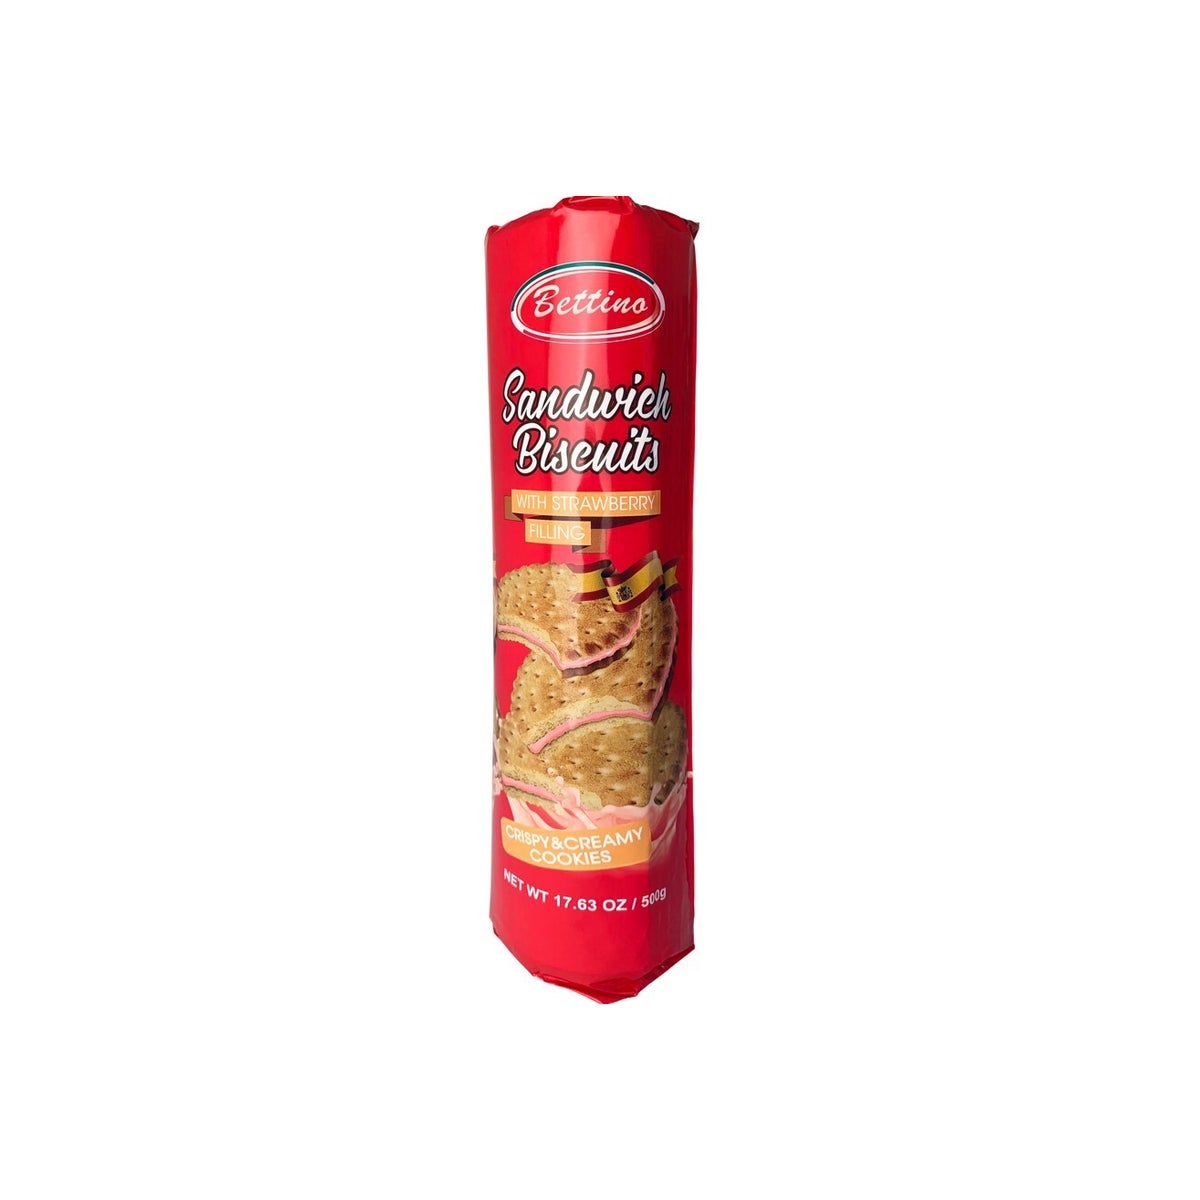 Bettino Sandwich Biscuits with Strawberry Filling 17.6oz 500 643700361370